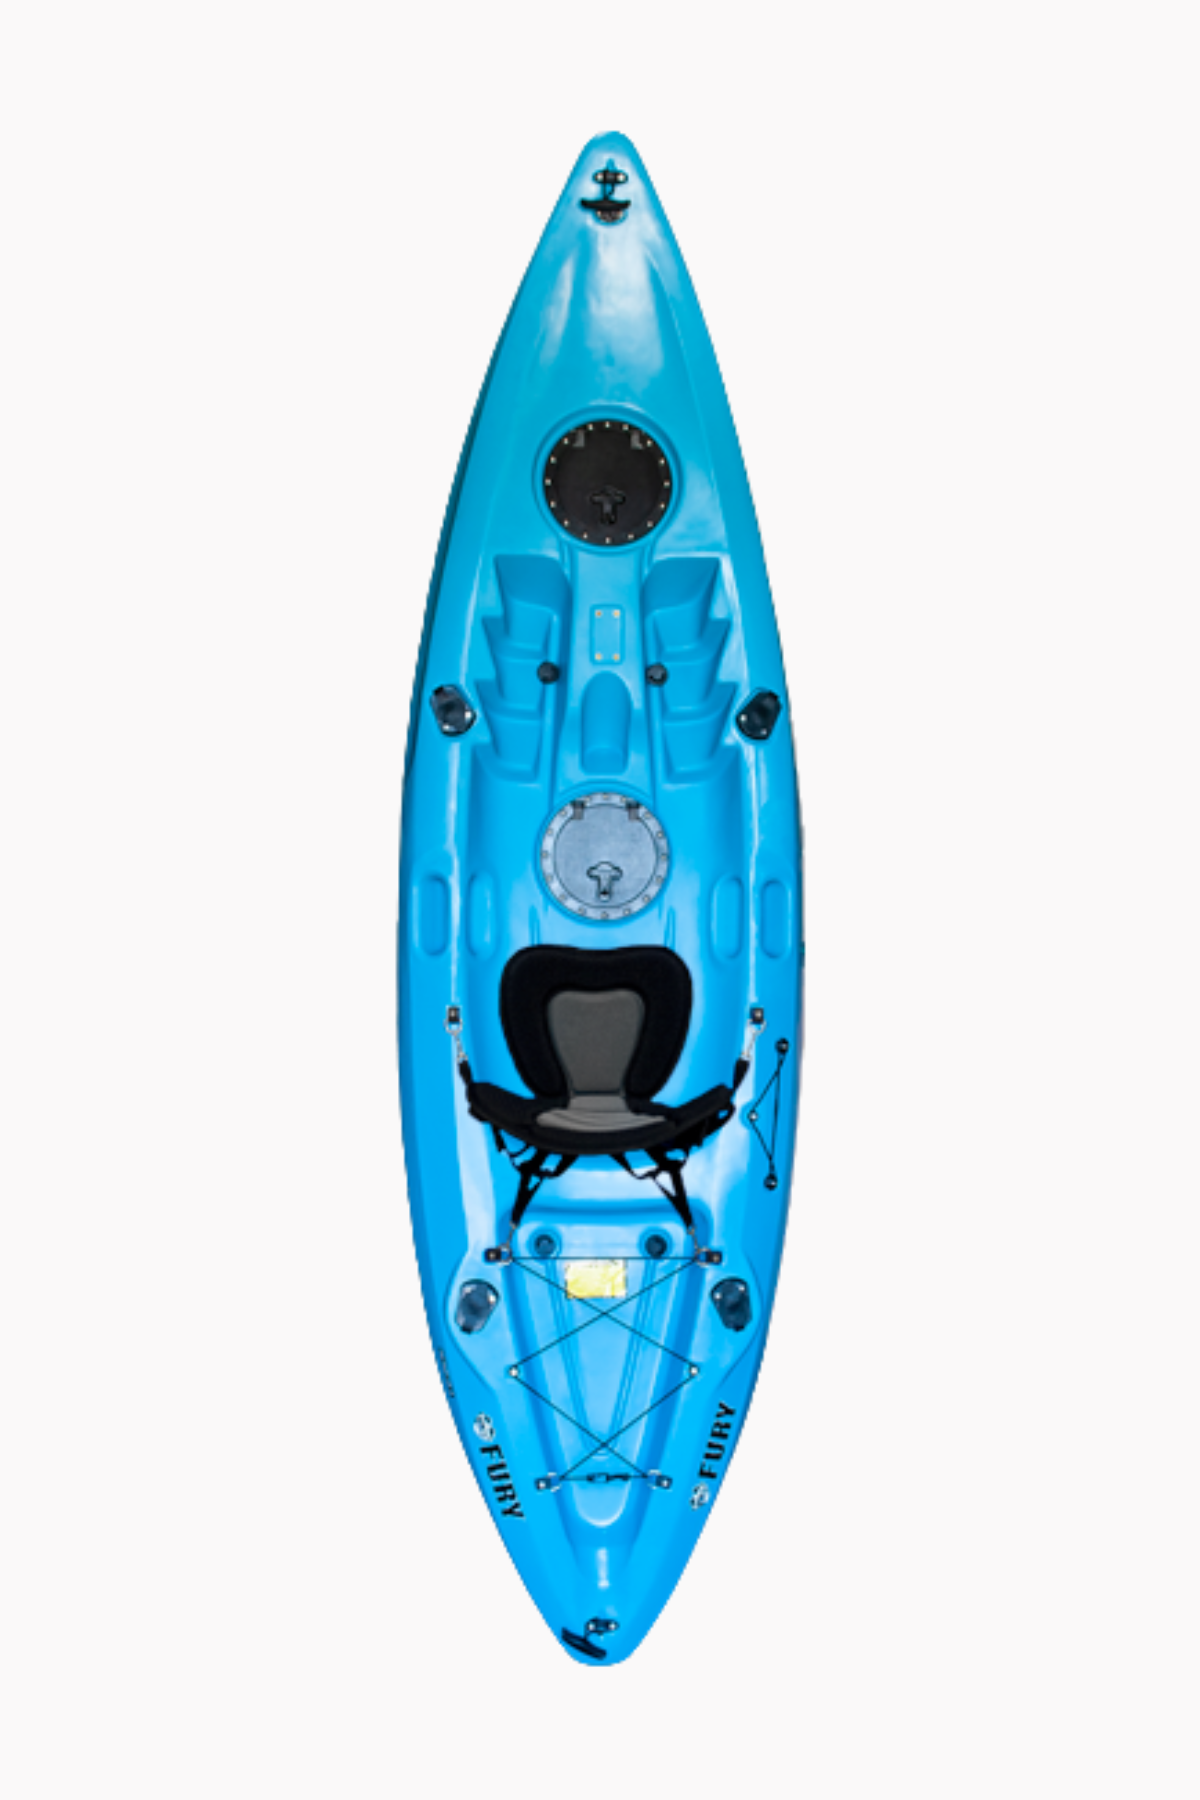 White Knuckle Fury Kayak - Cottage Toys Canada